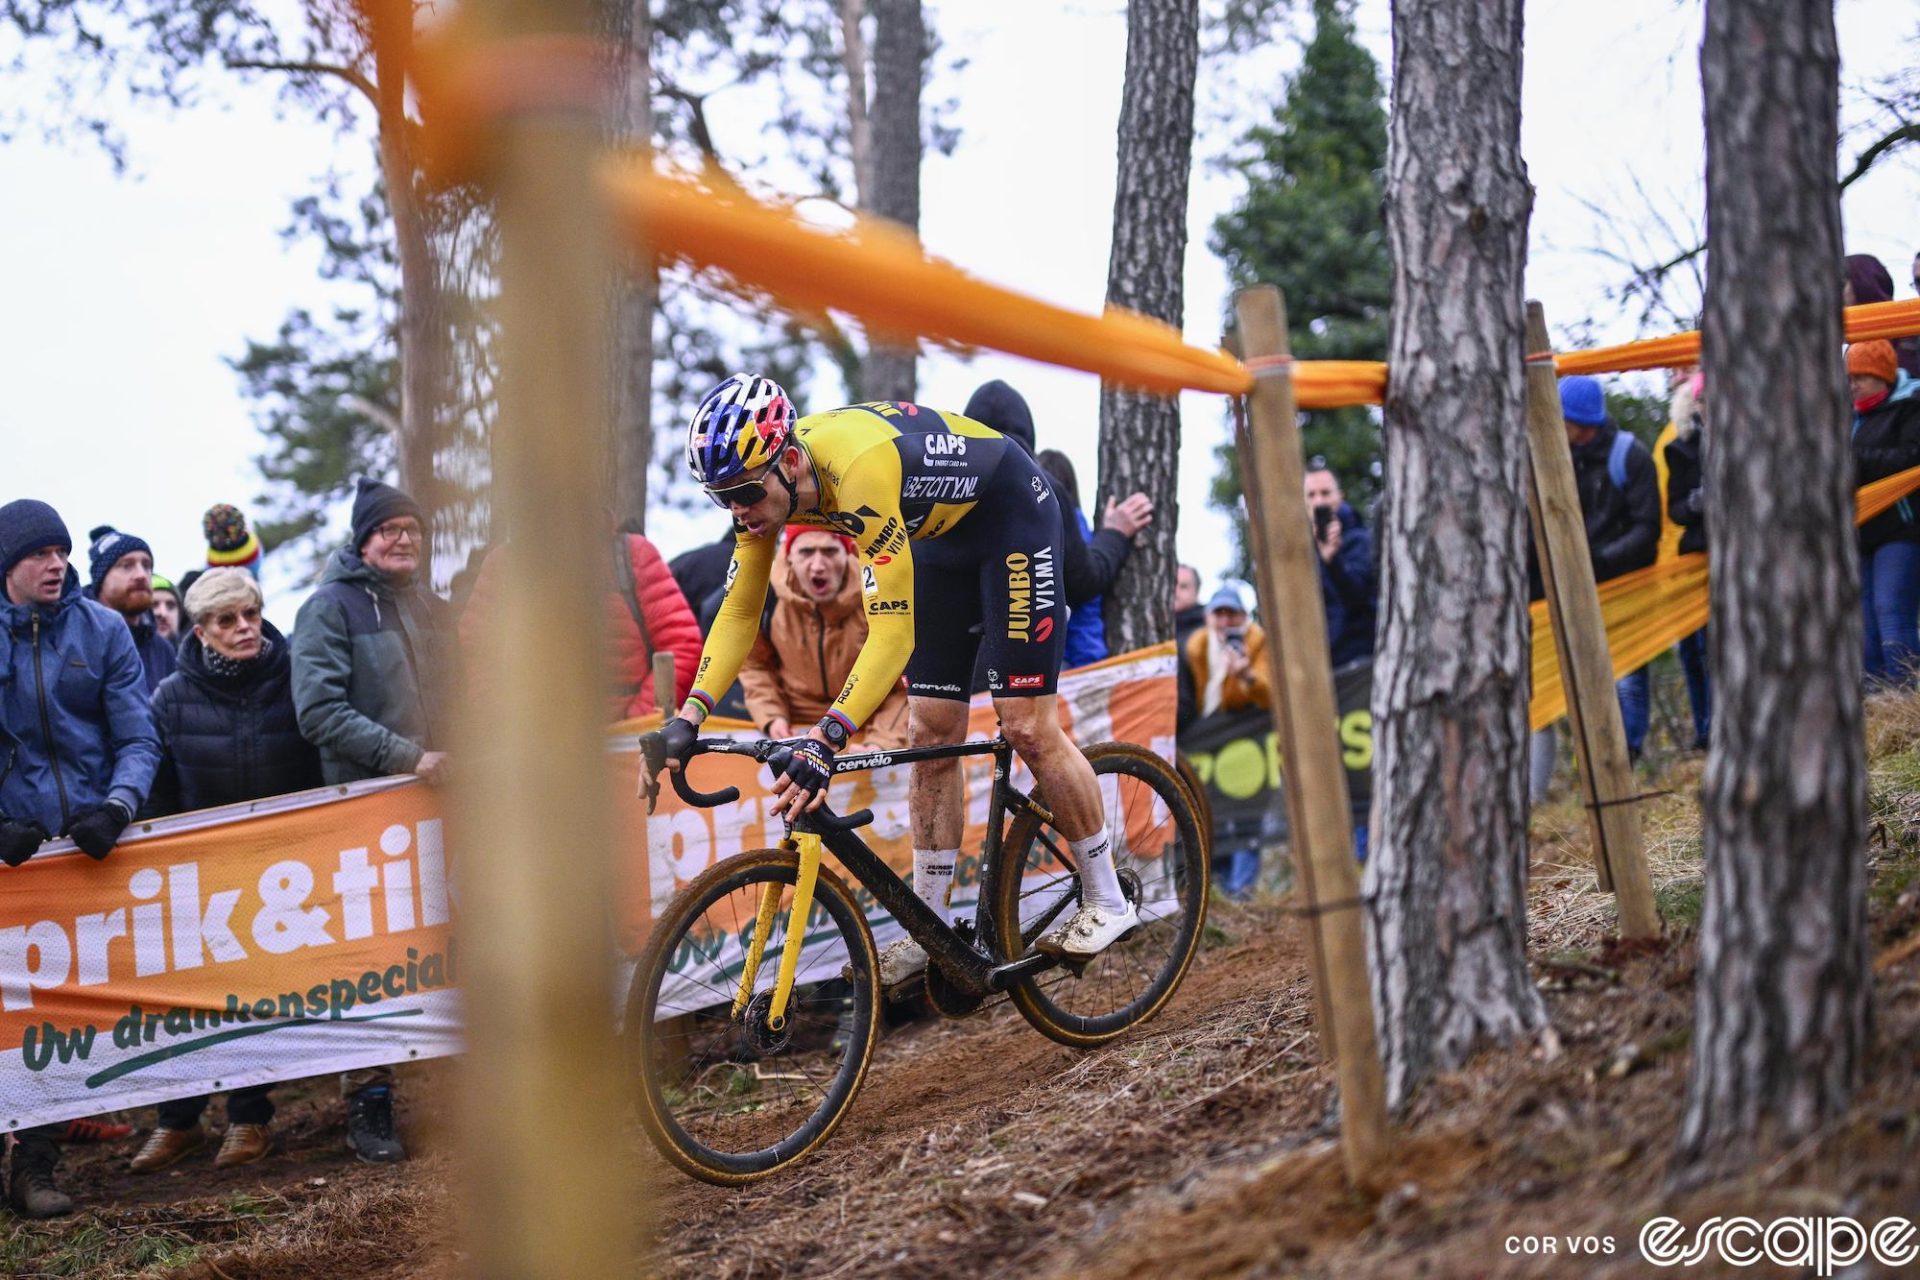 Van Aert descends a tricky section in the trees.